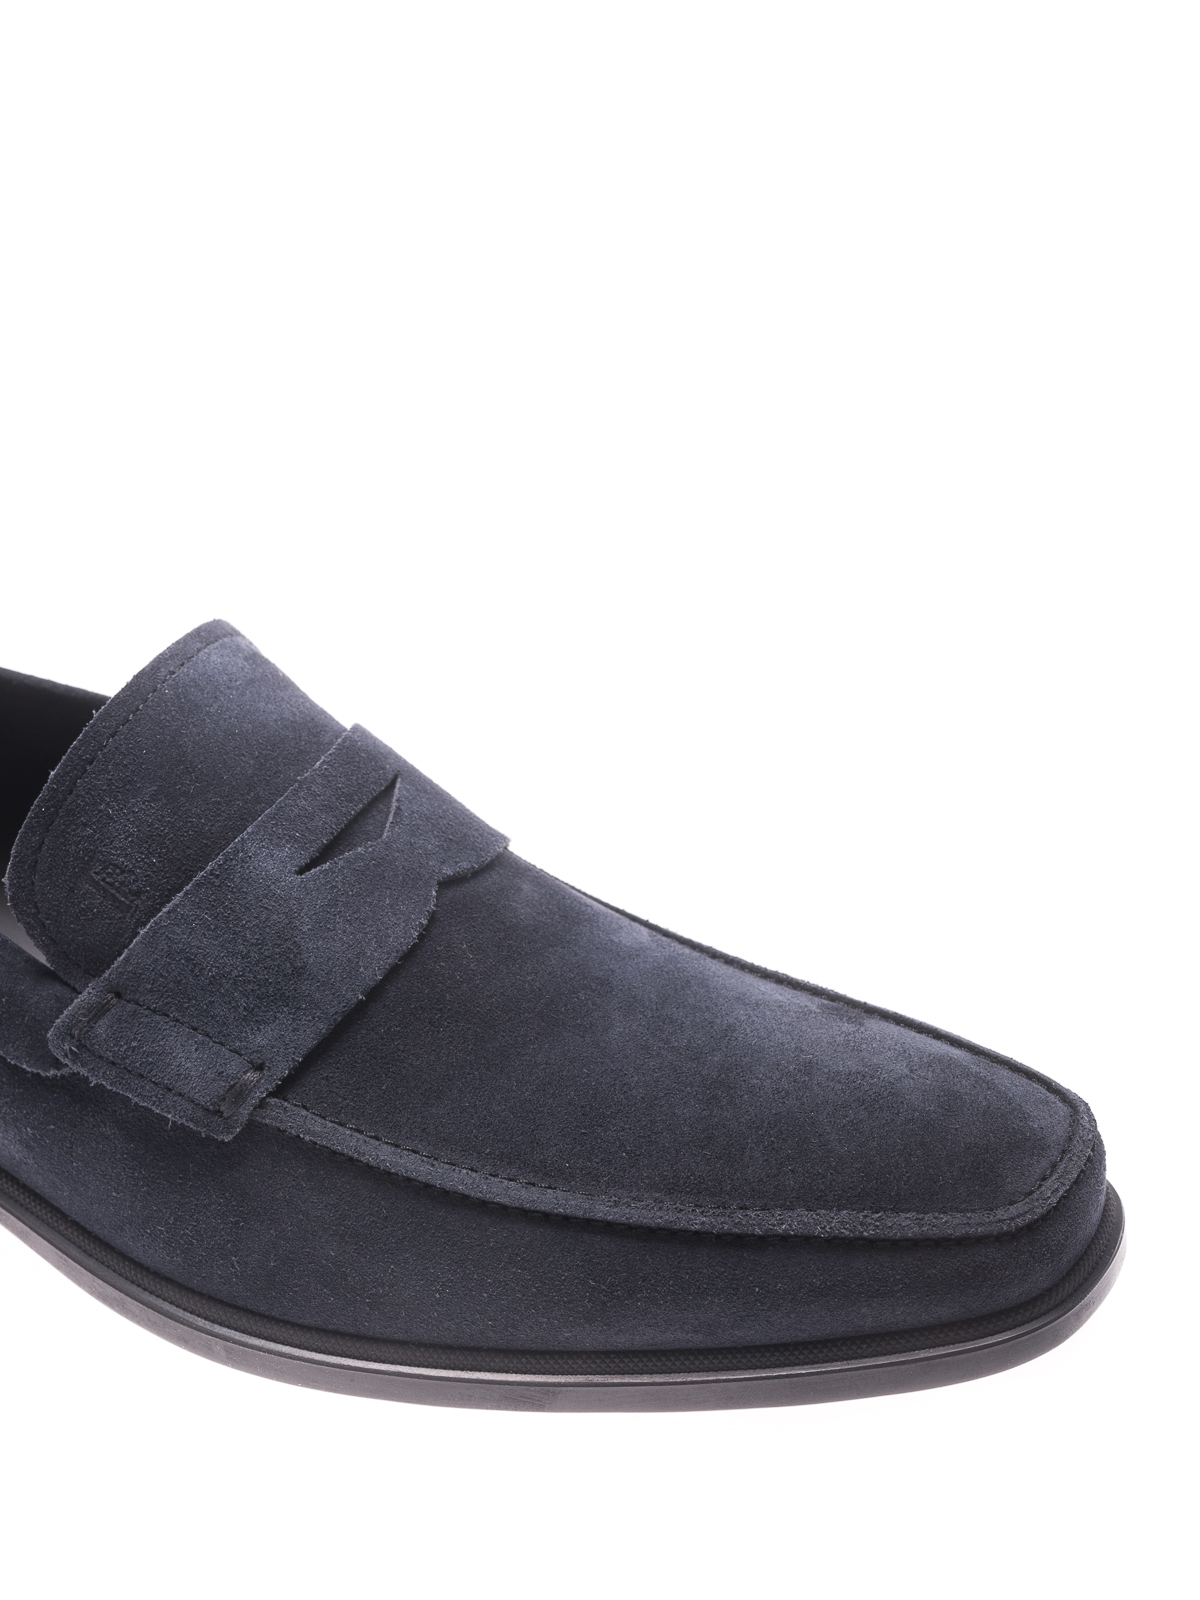 tods blue suede loafers